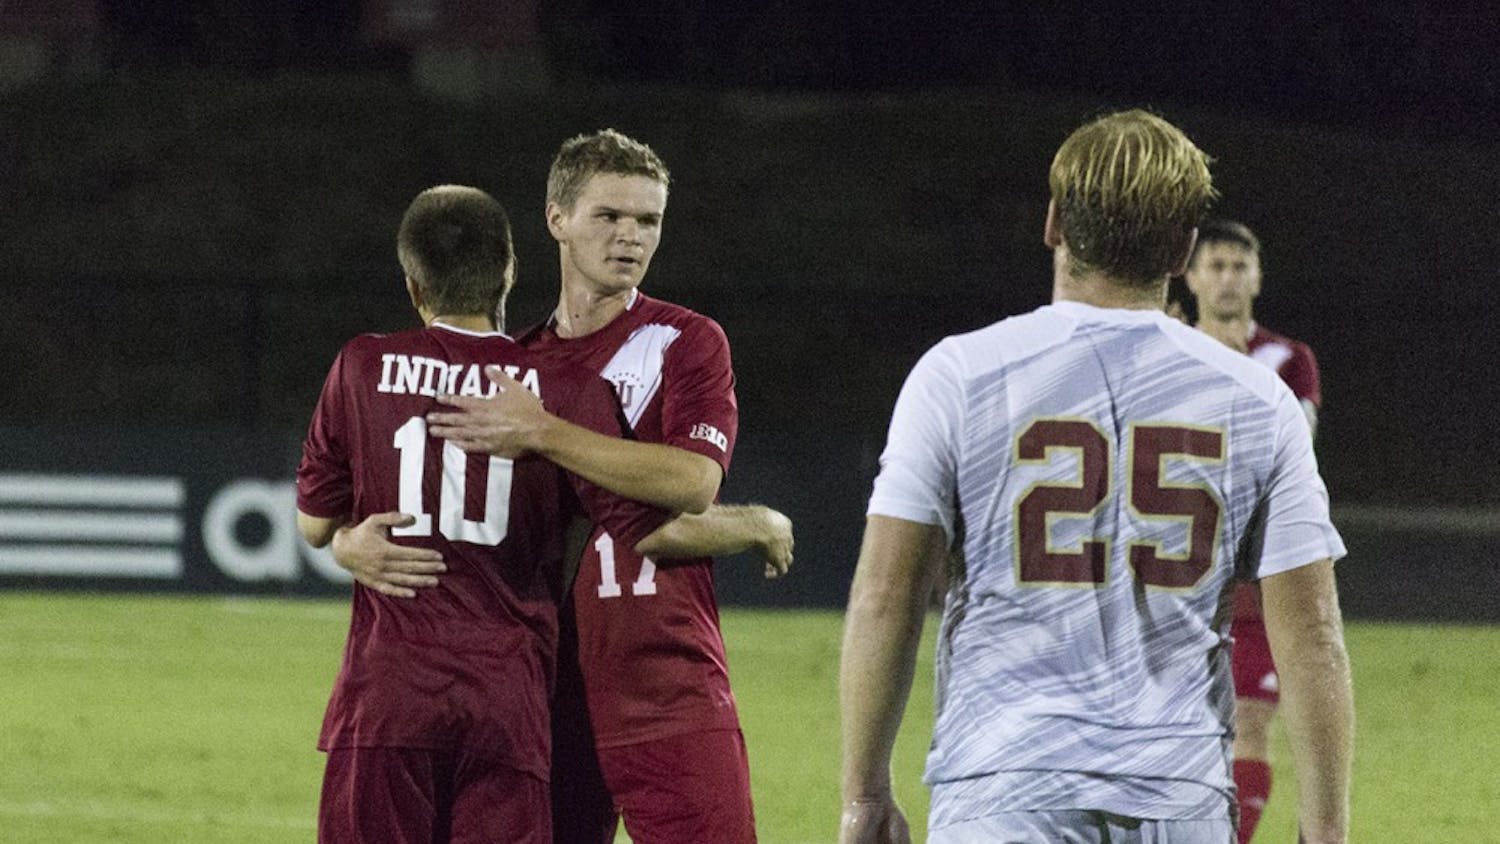 Tanner Thompson and Jeremiah Gutjahr celebrate after Thompson's goal lifted the Hoosiers to their 2-0 victory over IUPUI at Bill Armstrong Stadium.